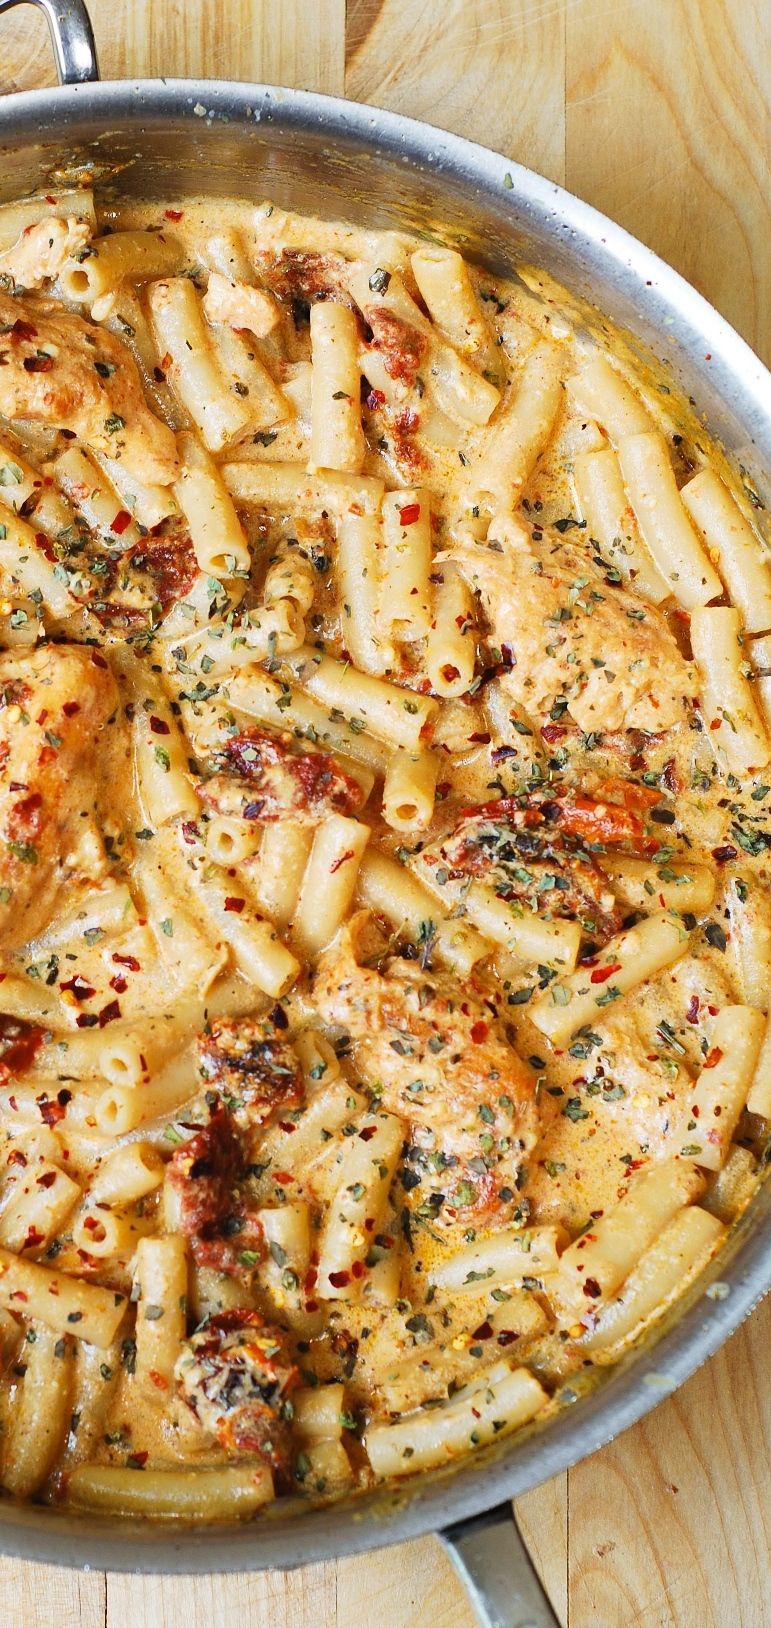 Chicken breast tenderloins sautéed with sun-dried tomatoes and penne pasta in a creamy mozzarella cheese sauce seasoned with basil, crushed red pepper flakes. If you love pasta, if you love Italian